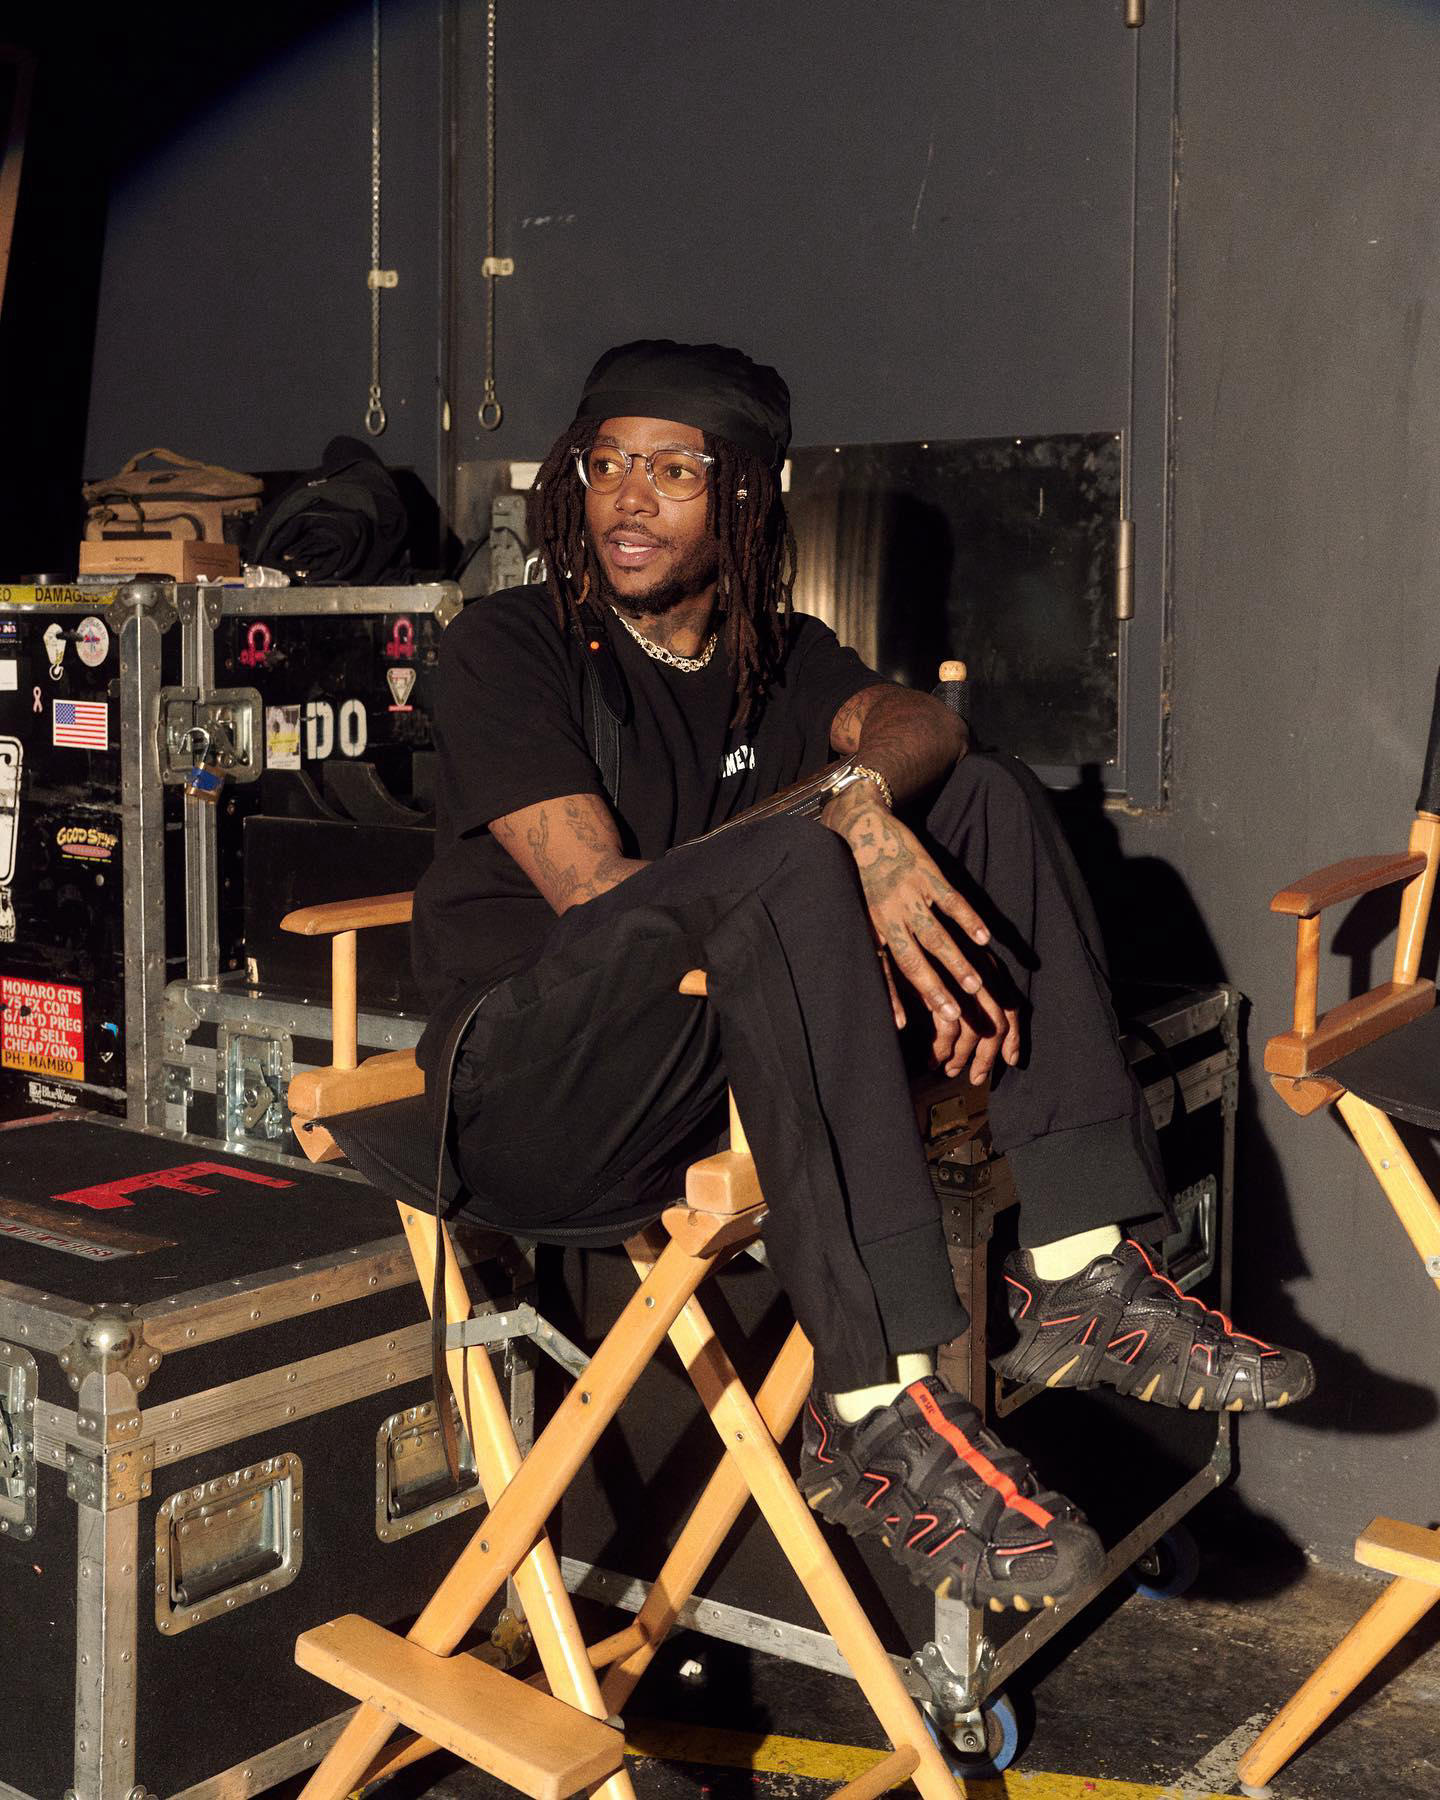 American Music Awards - Spotted #jidsv at #AMAs rehearsals